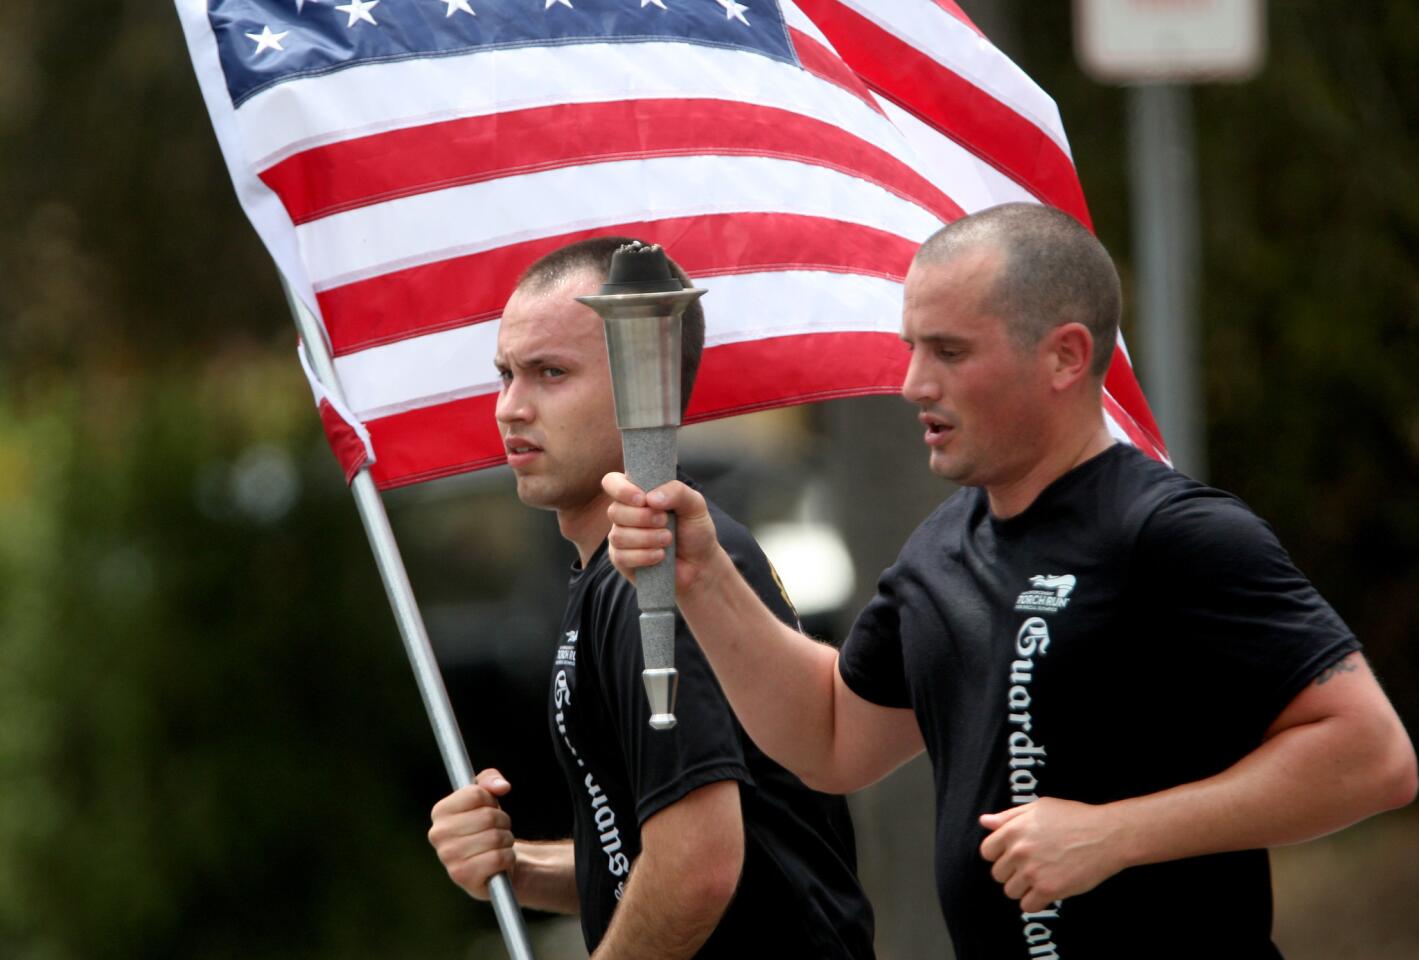 Glendale Police Department cadet Omar Preciado, left, carries the USA flag as detective Jeff Davis carries the Special Olympics torch as they travel south on Chevy Chase Ave. in Glendale on Wednesday, June 10, 2015.